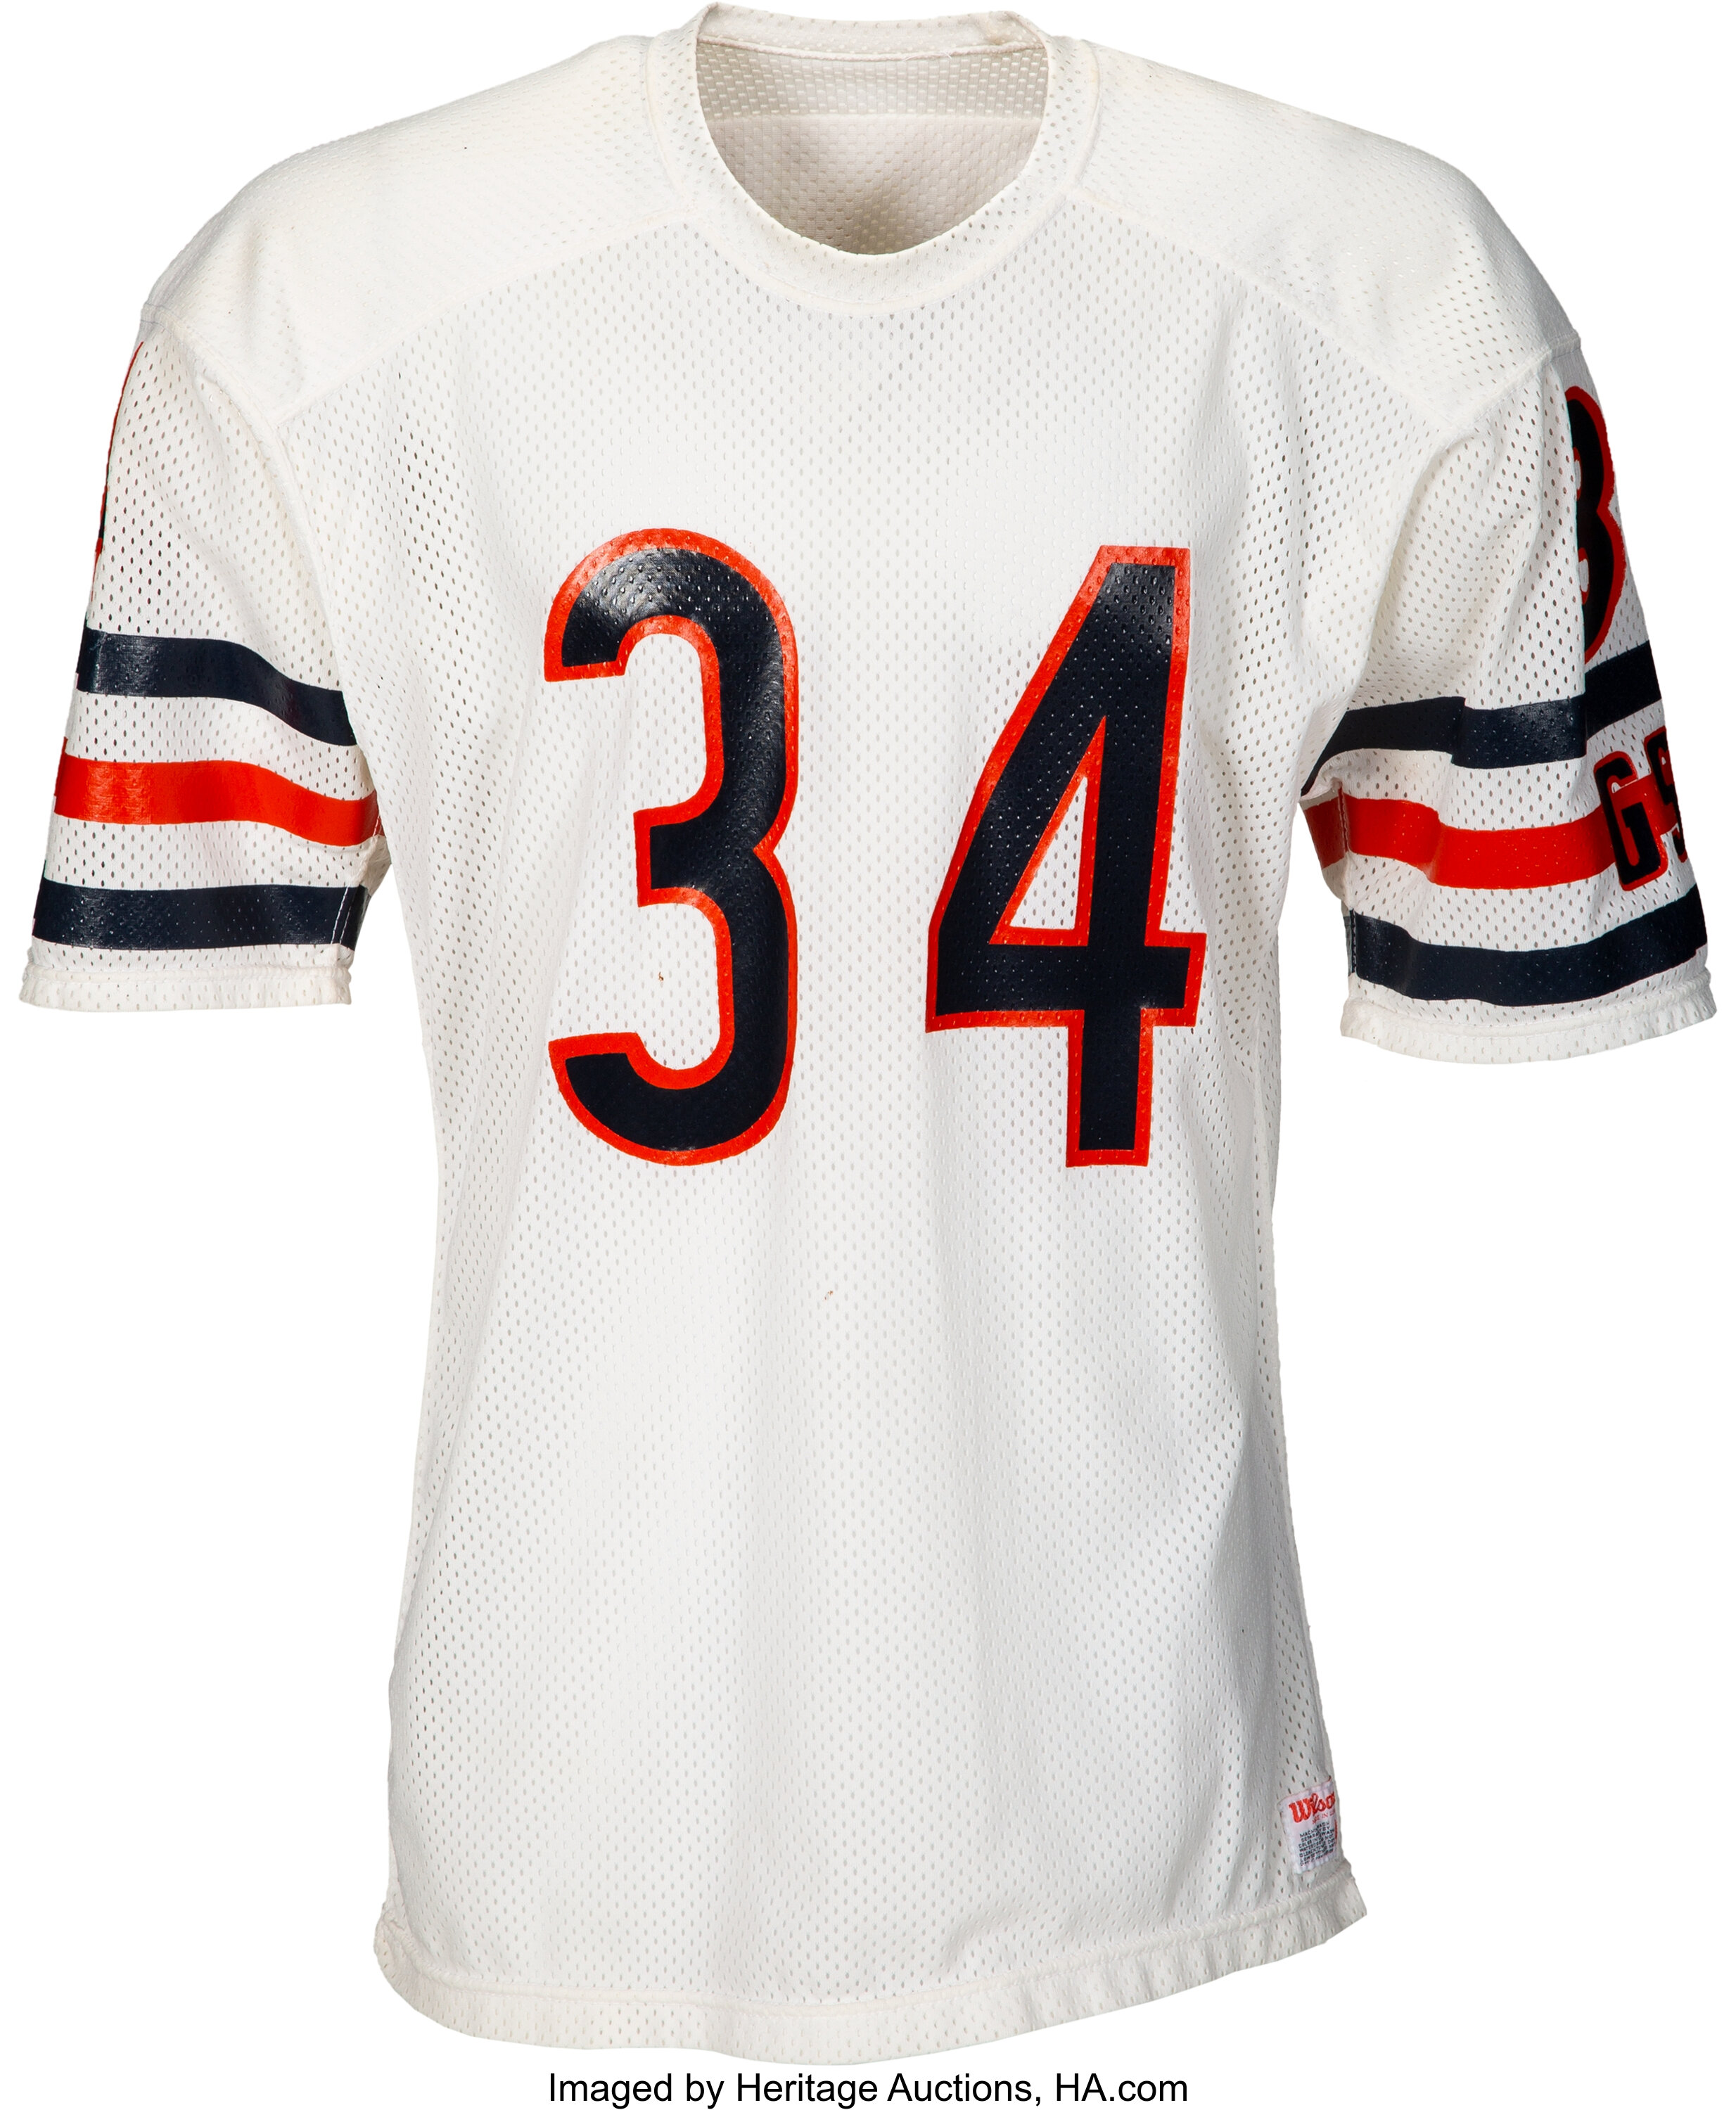 1986 Walter Chicago Bears Jersey.... | Lot | Heritage Auctions